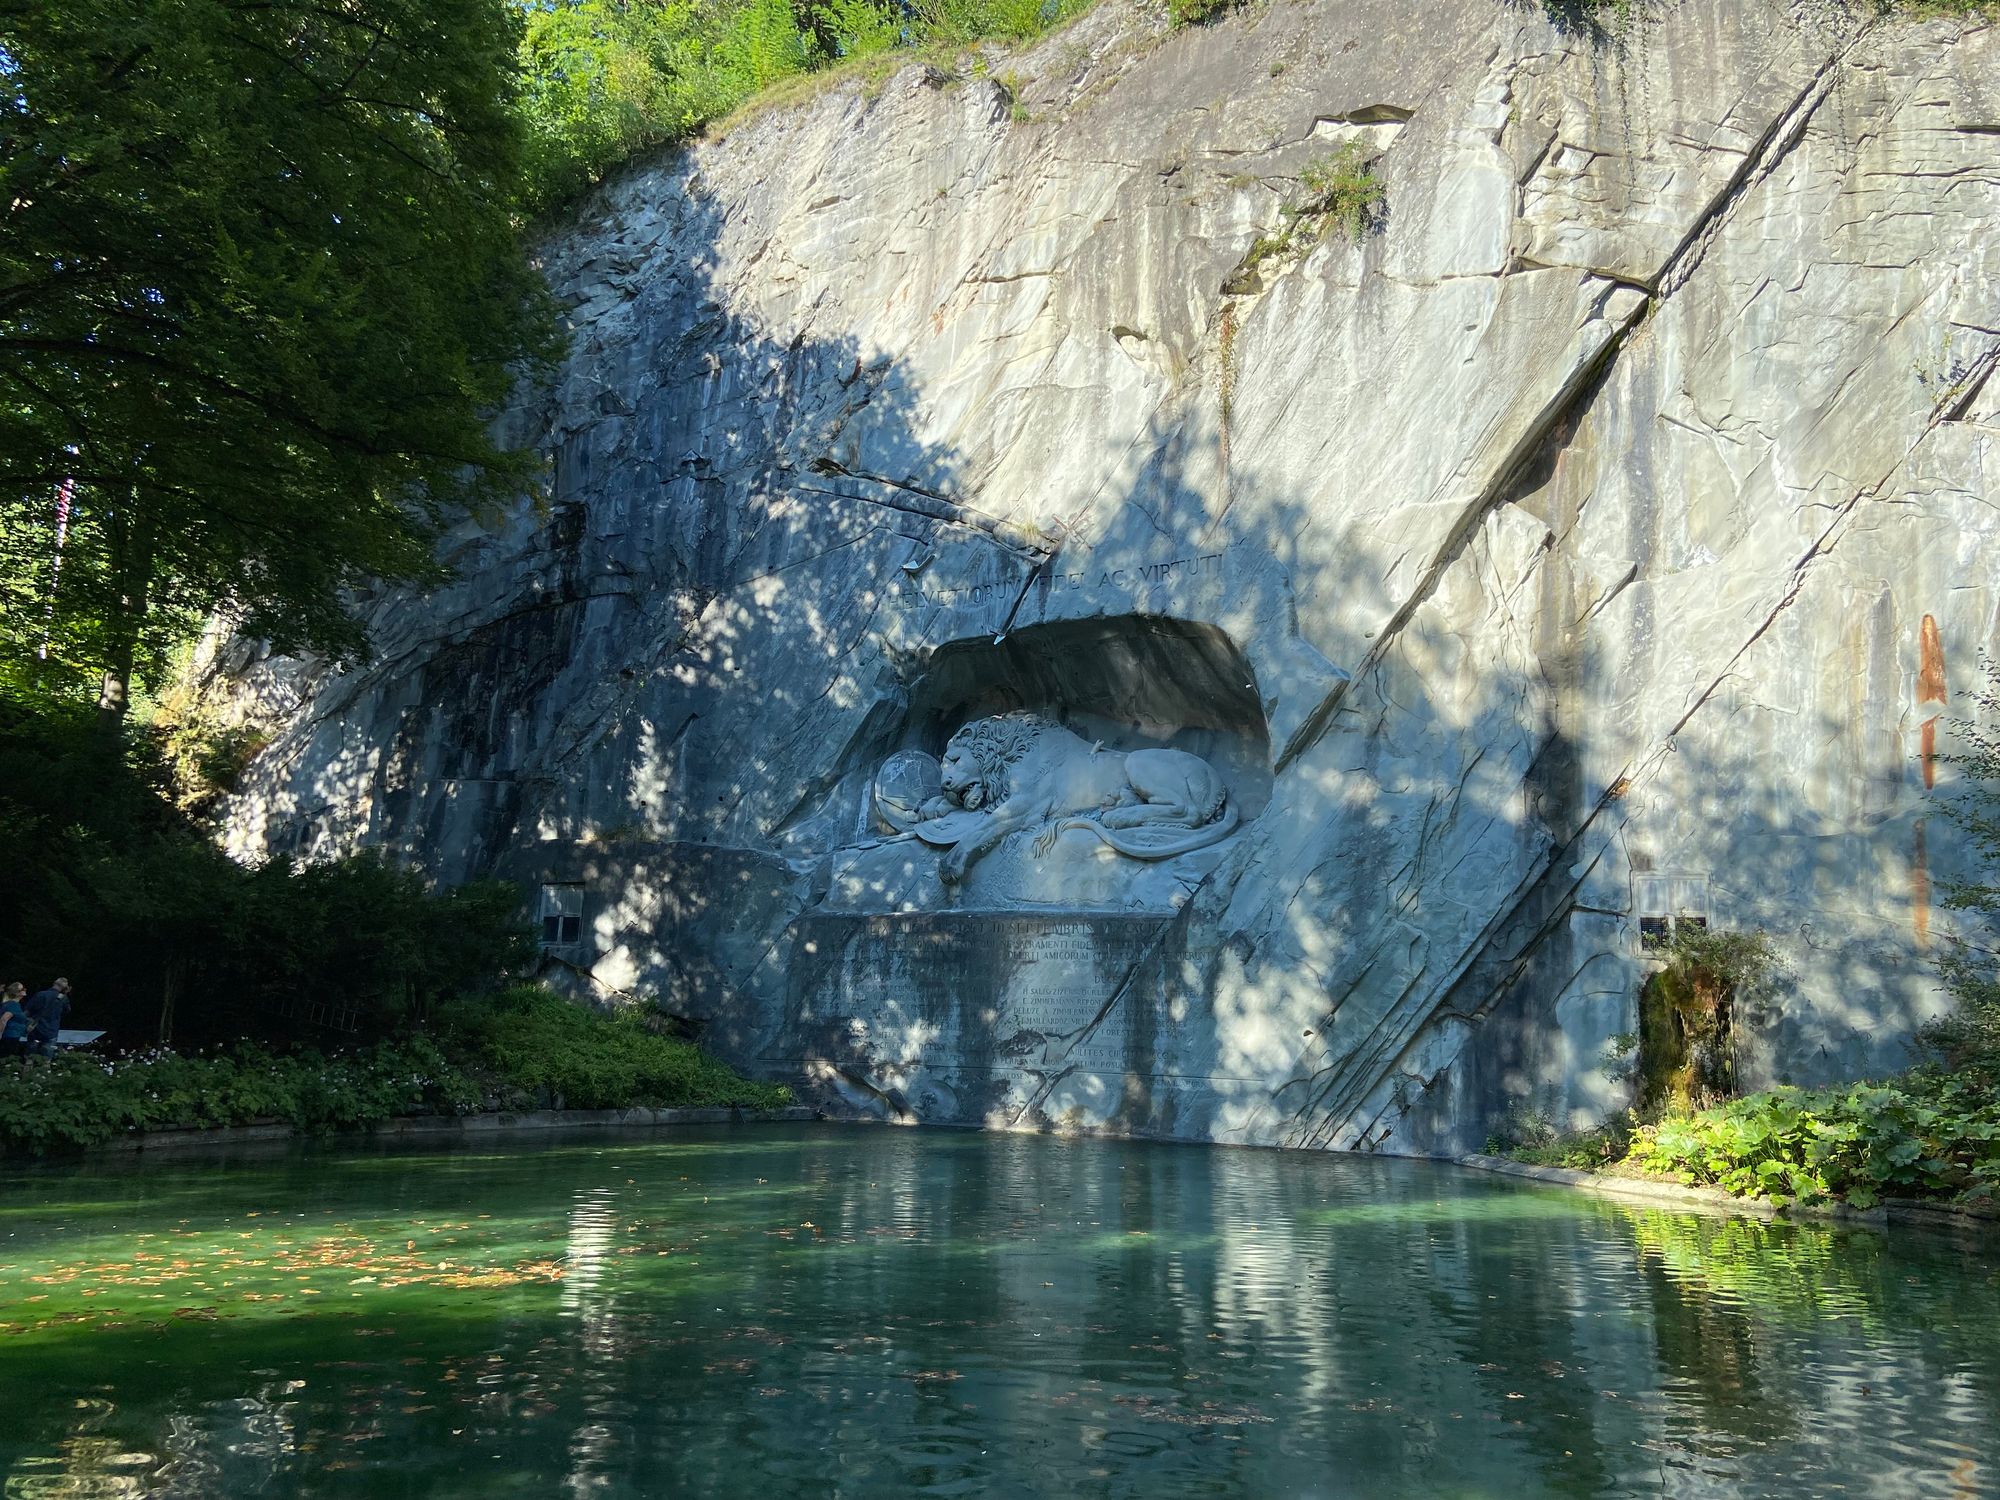 Sun dappled cliff face above a blue-green pond with a carving of a wounded lion in a niche about one-third of the way up the cliff.